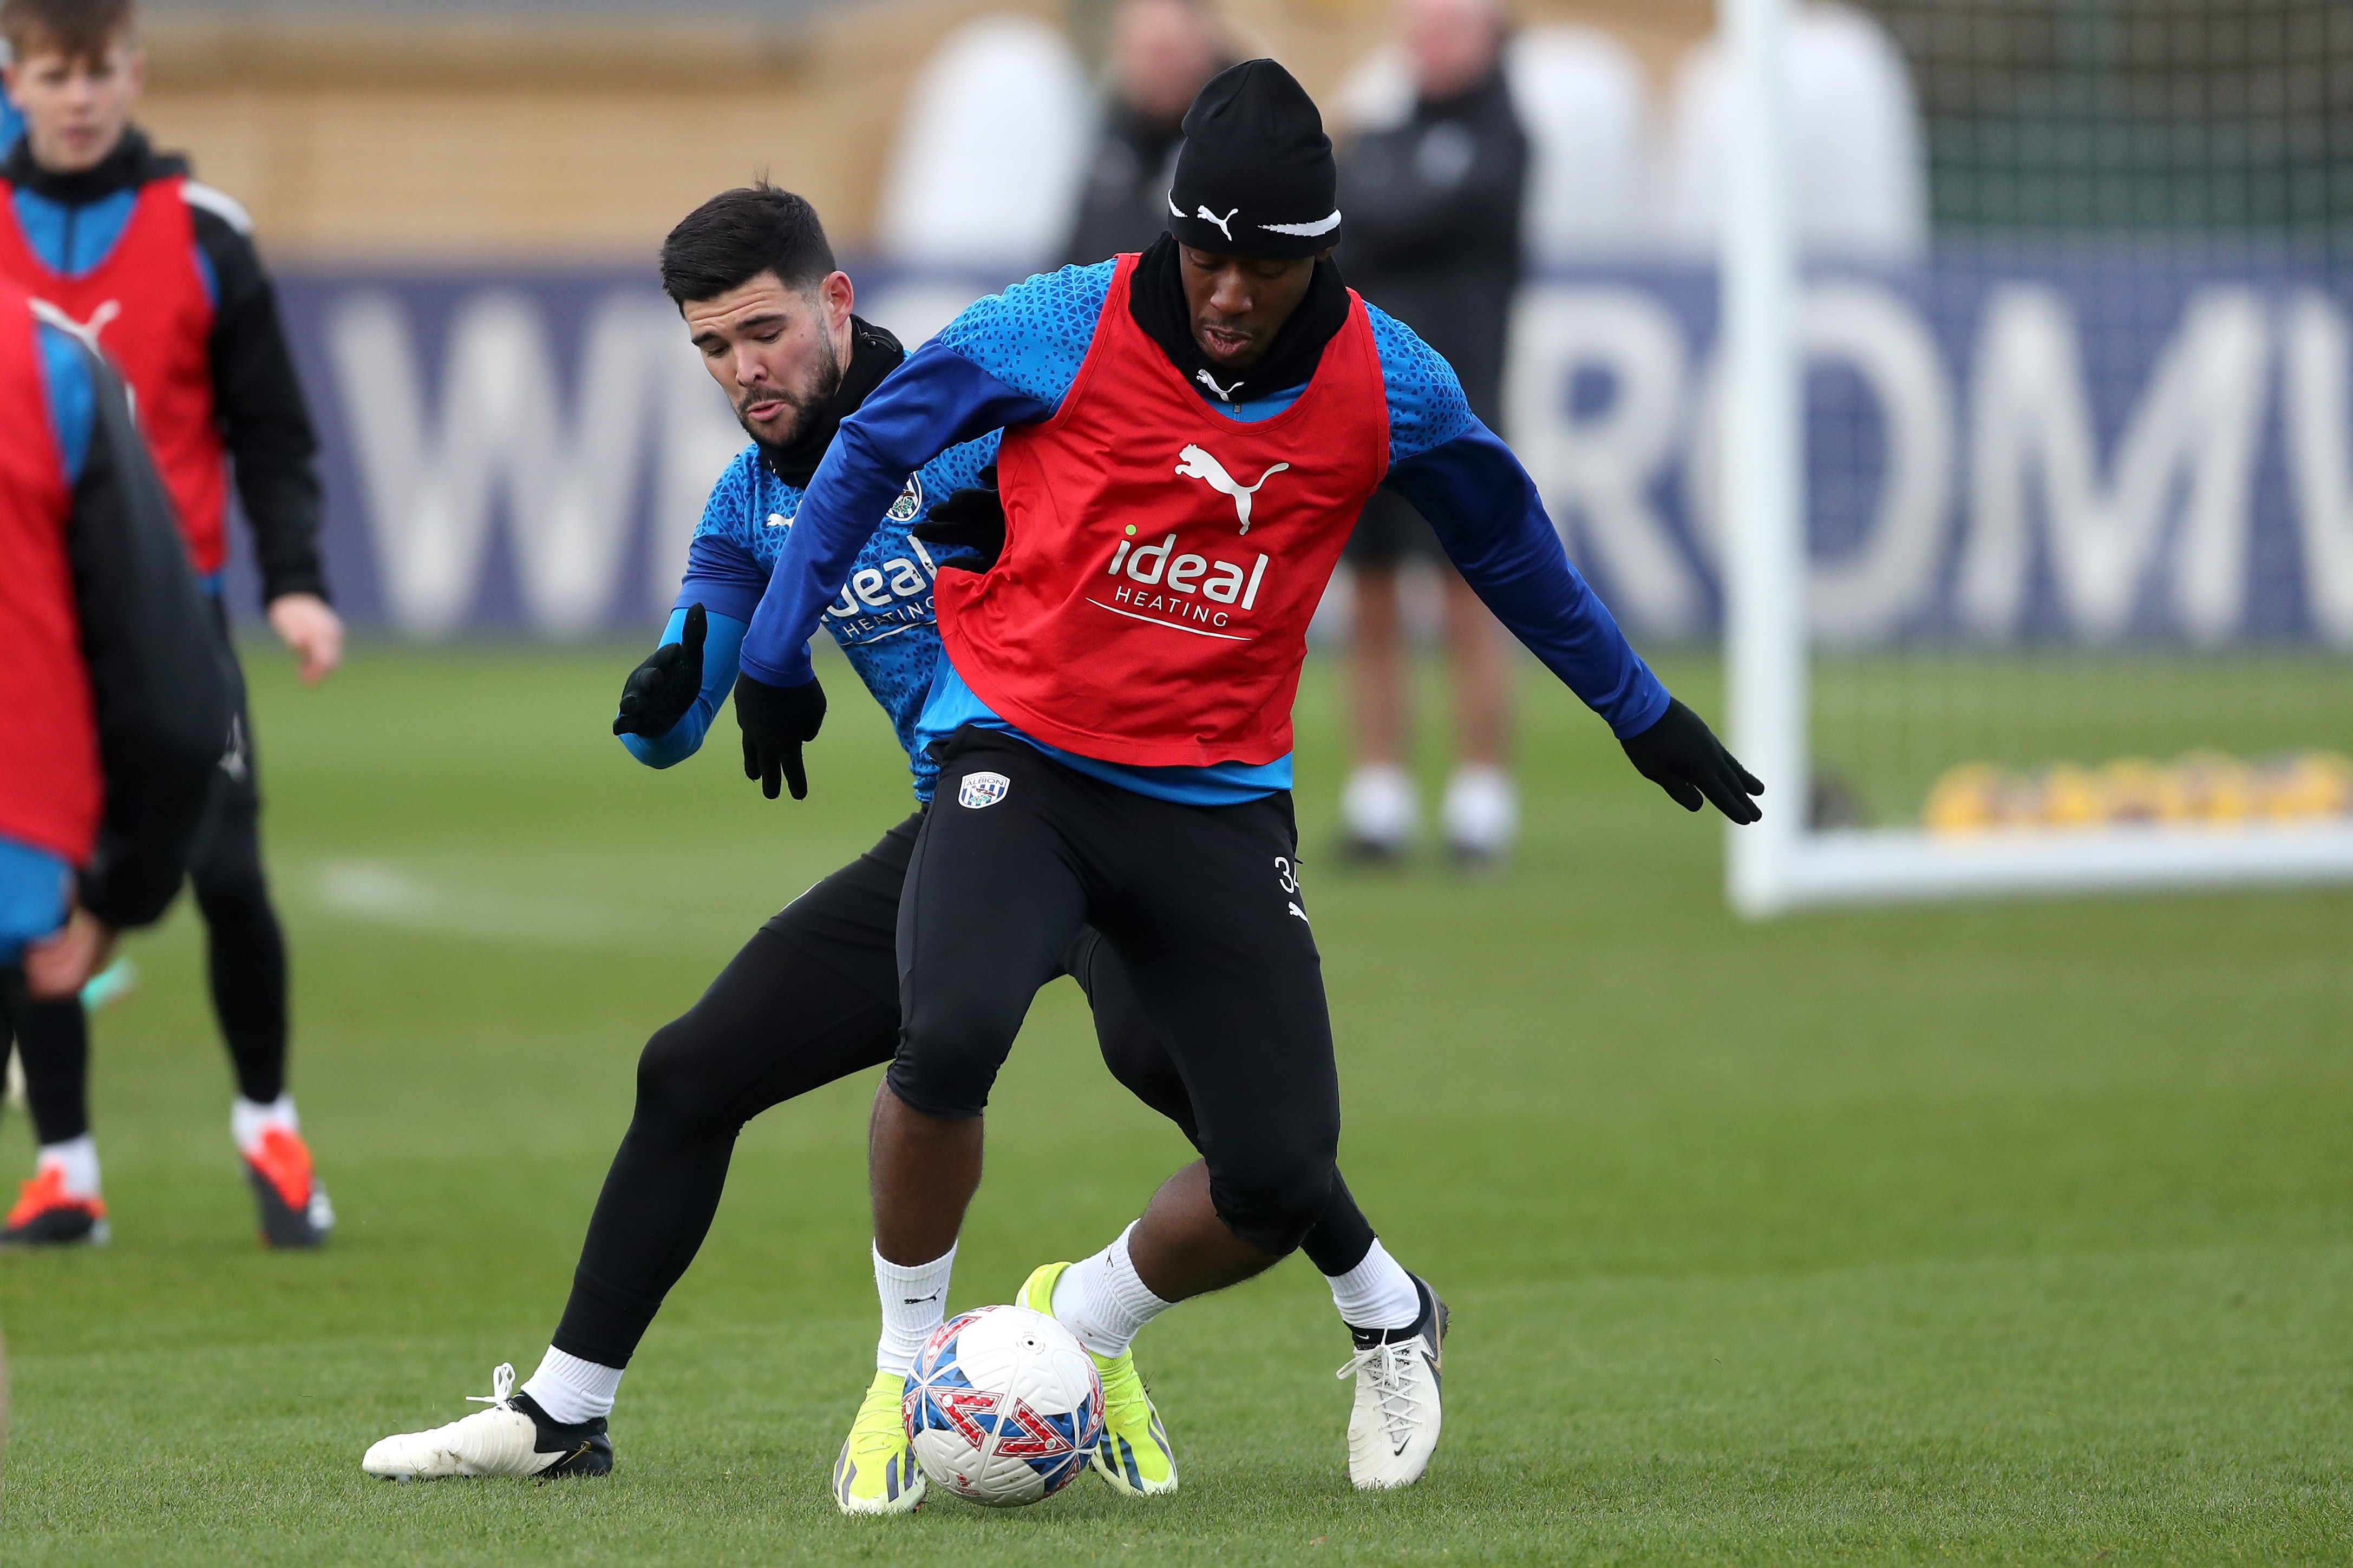 Jovan Malcolm on the ball in training